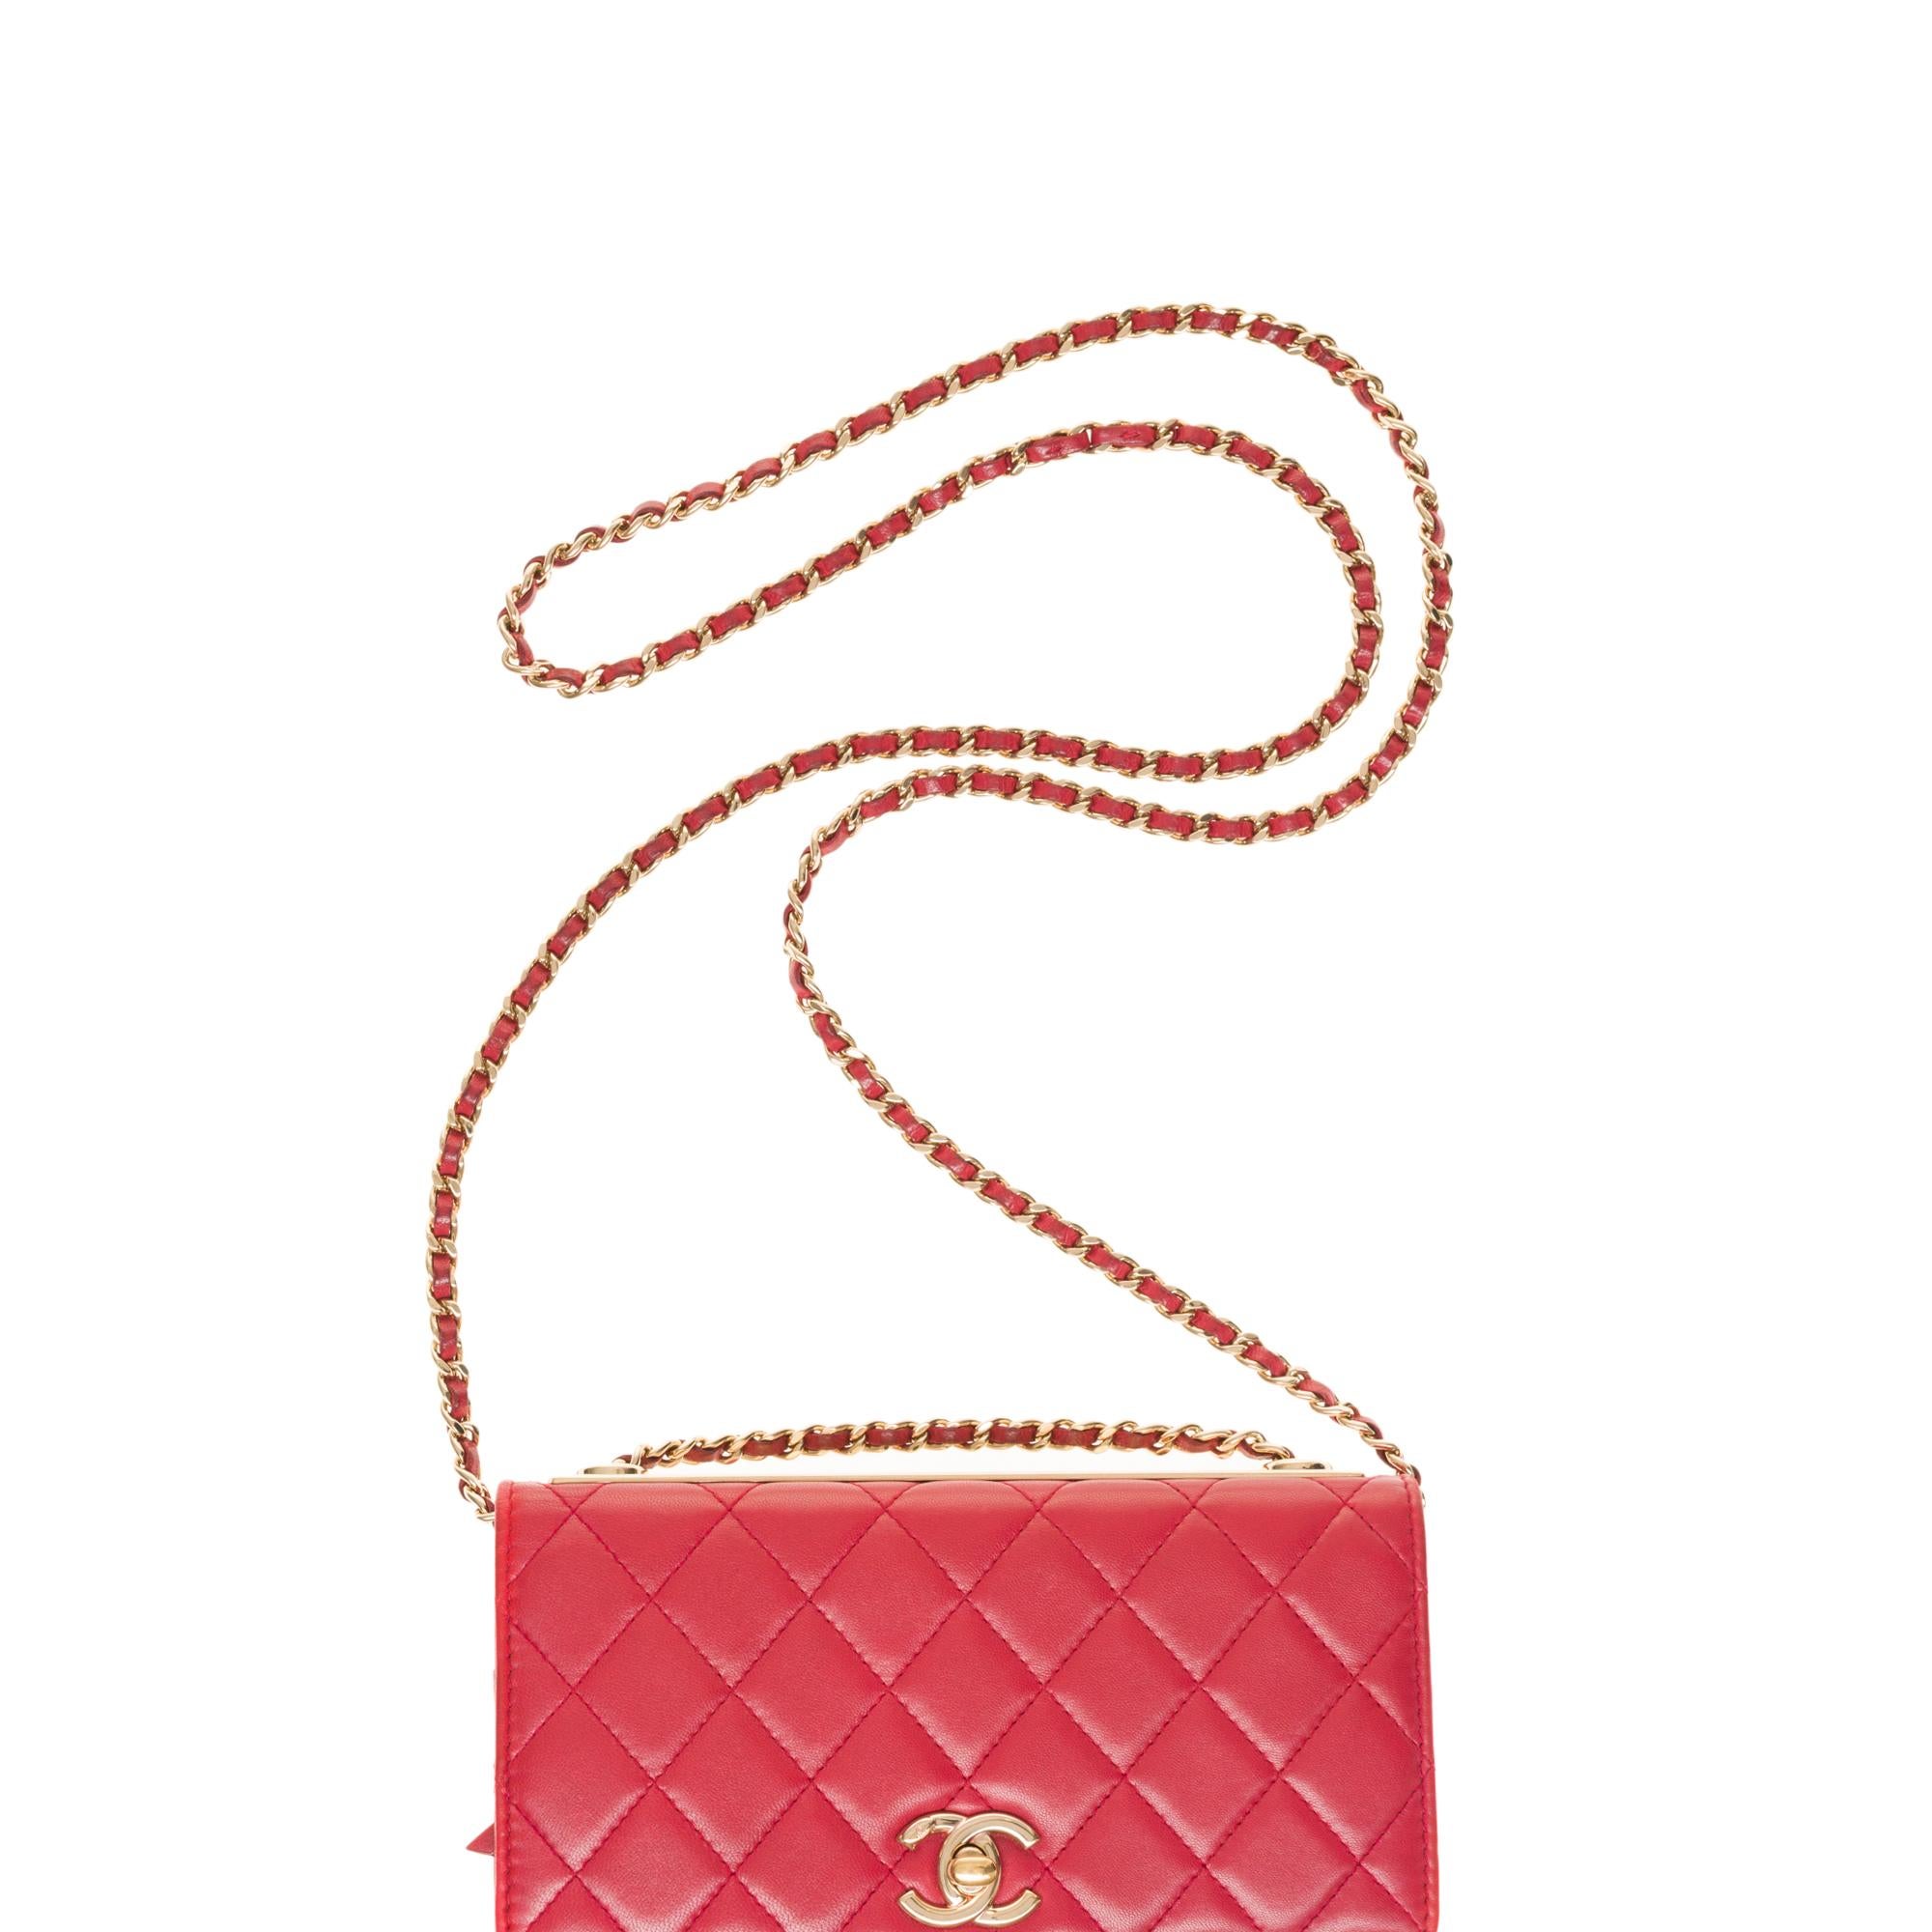 Fancy Chanel Wallet on Chain (WOC)  shoulder bag in red quilted leather, GHW 2